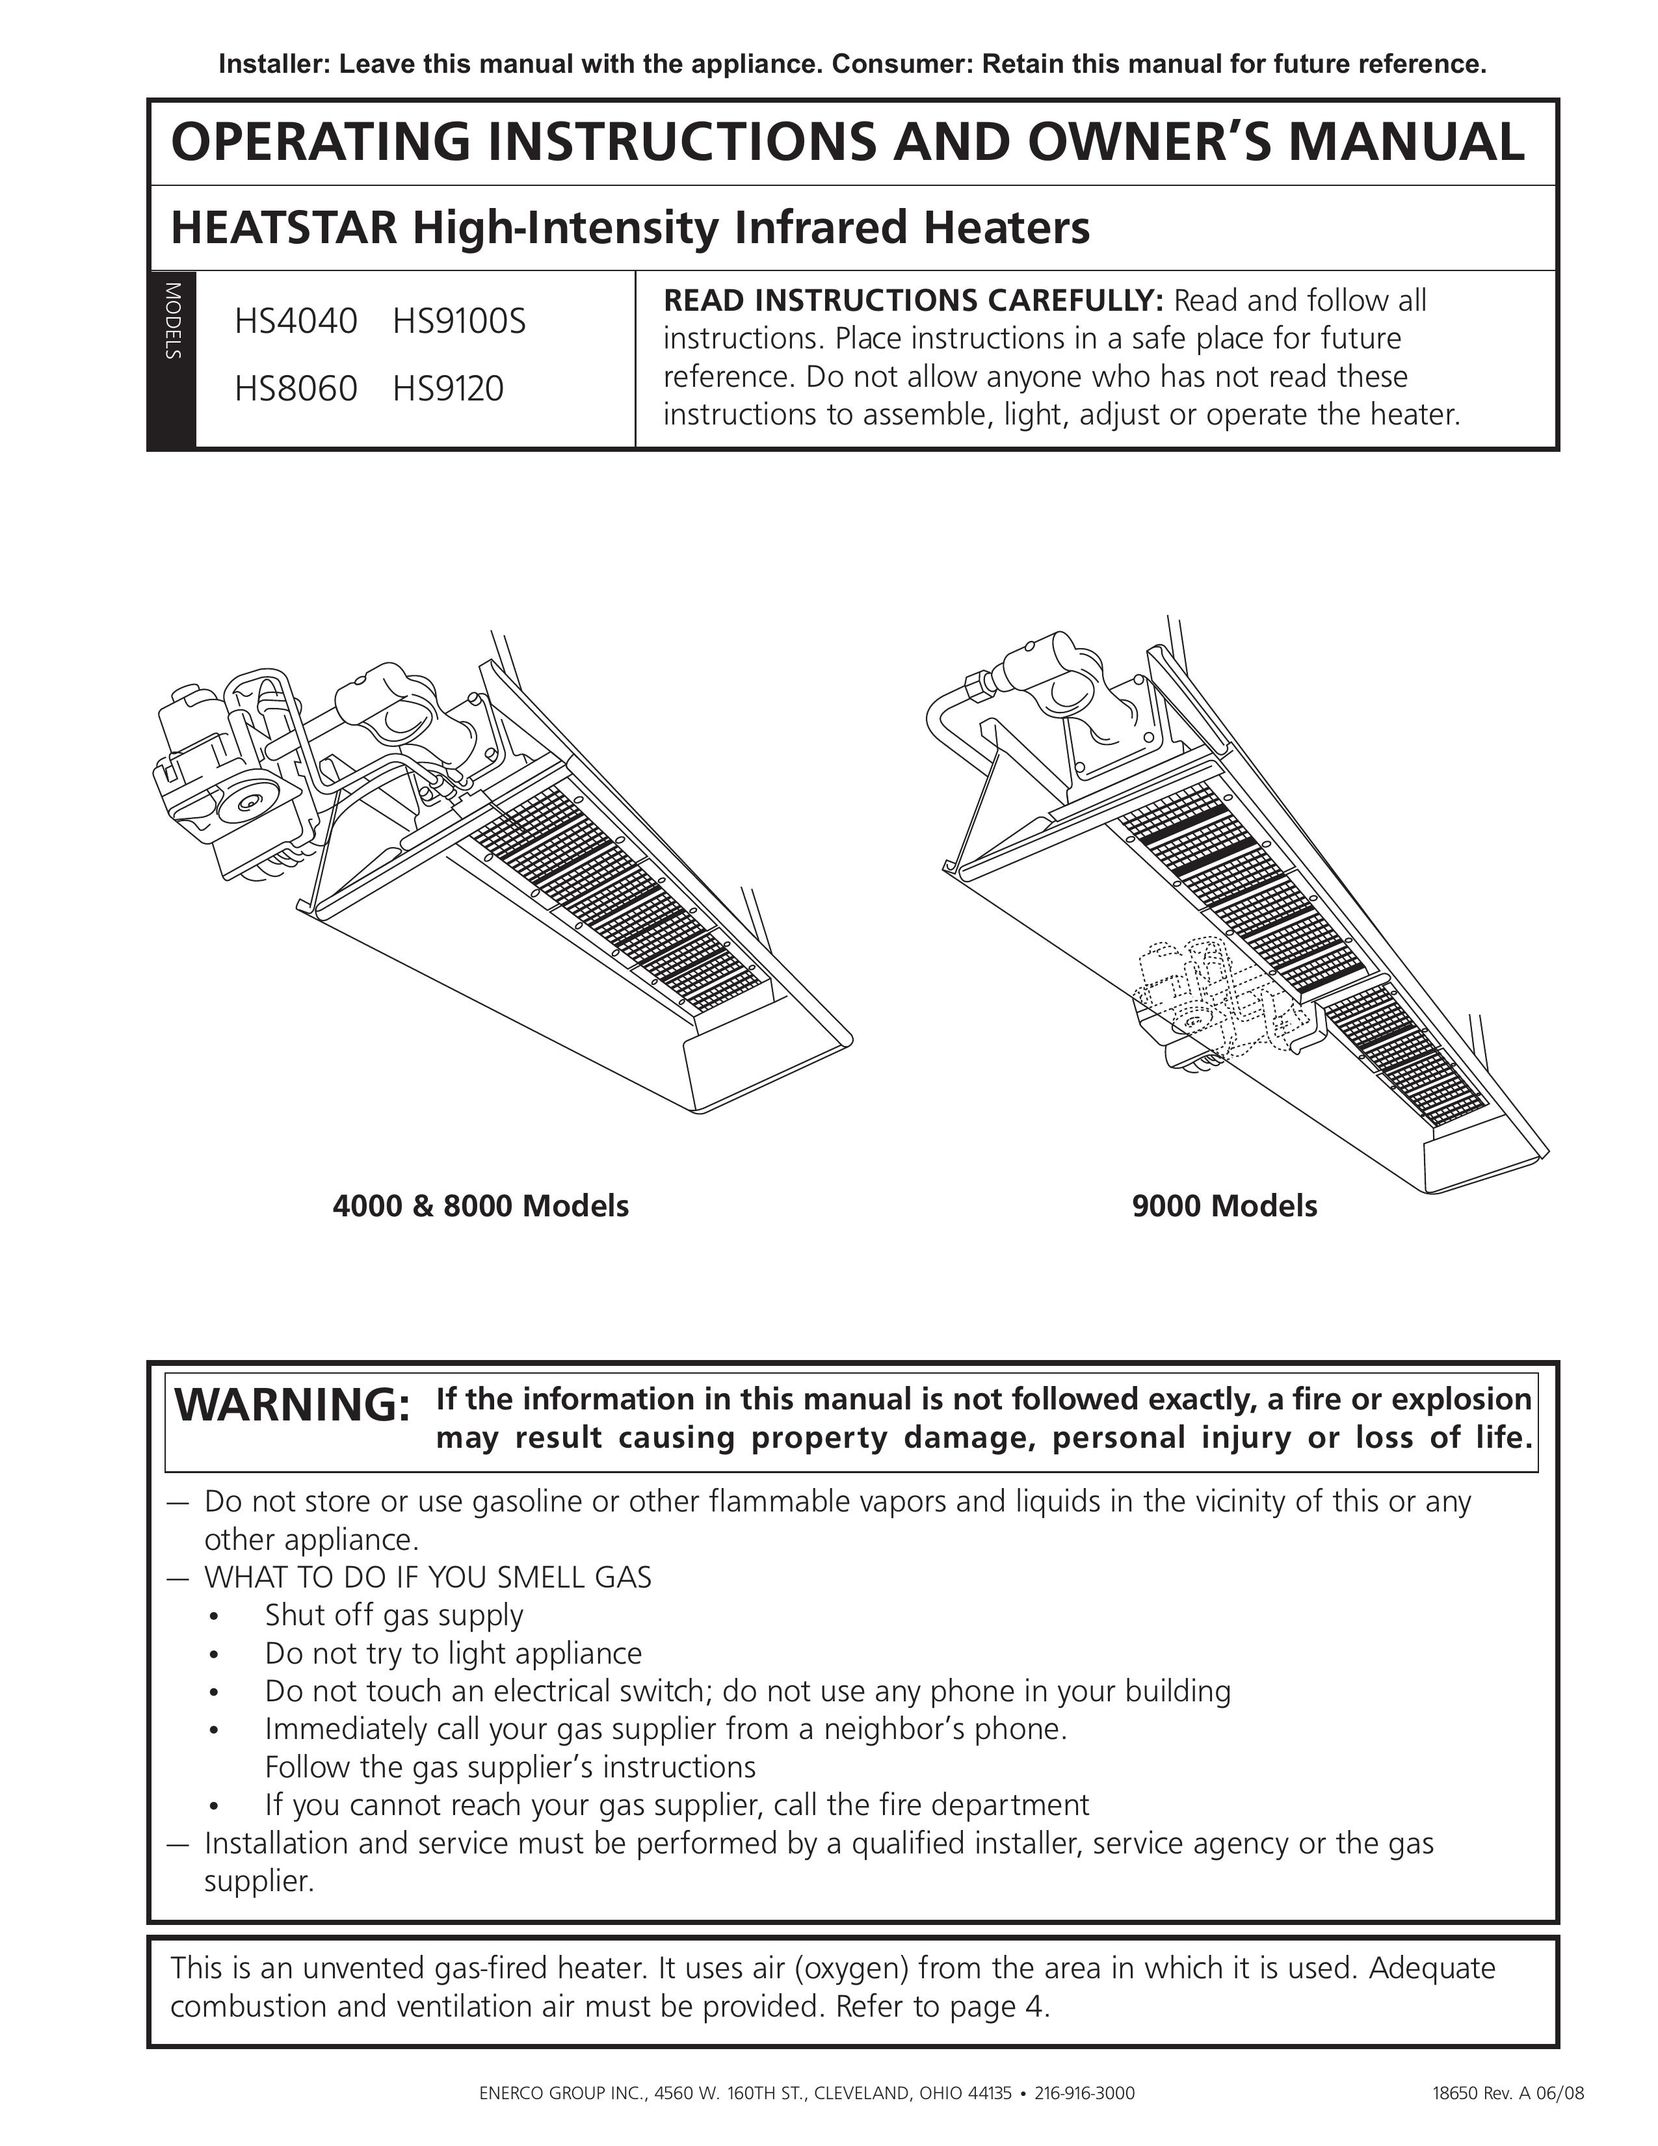 Enerco HS9120 Electric Heater User Manual